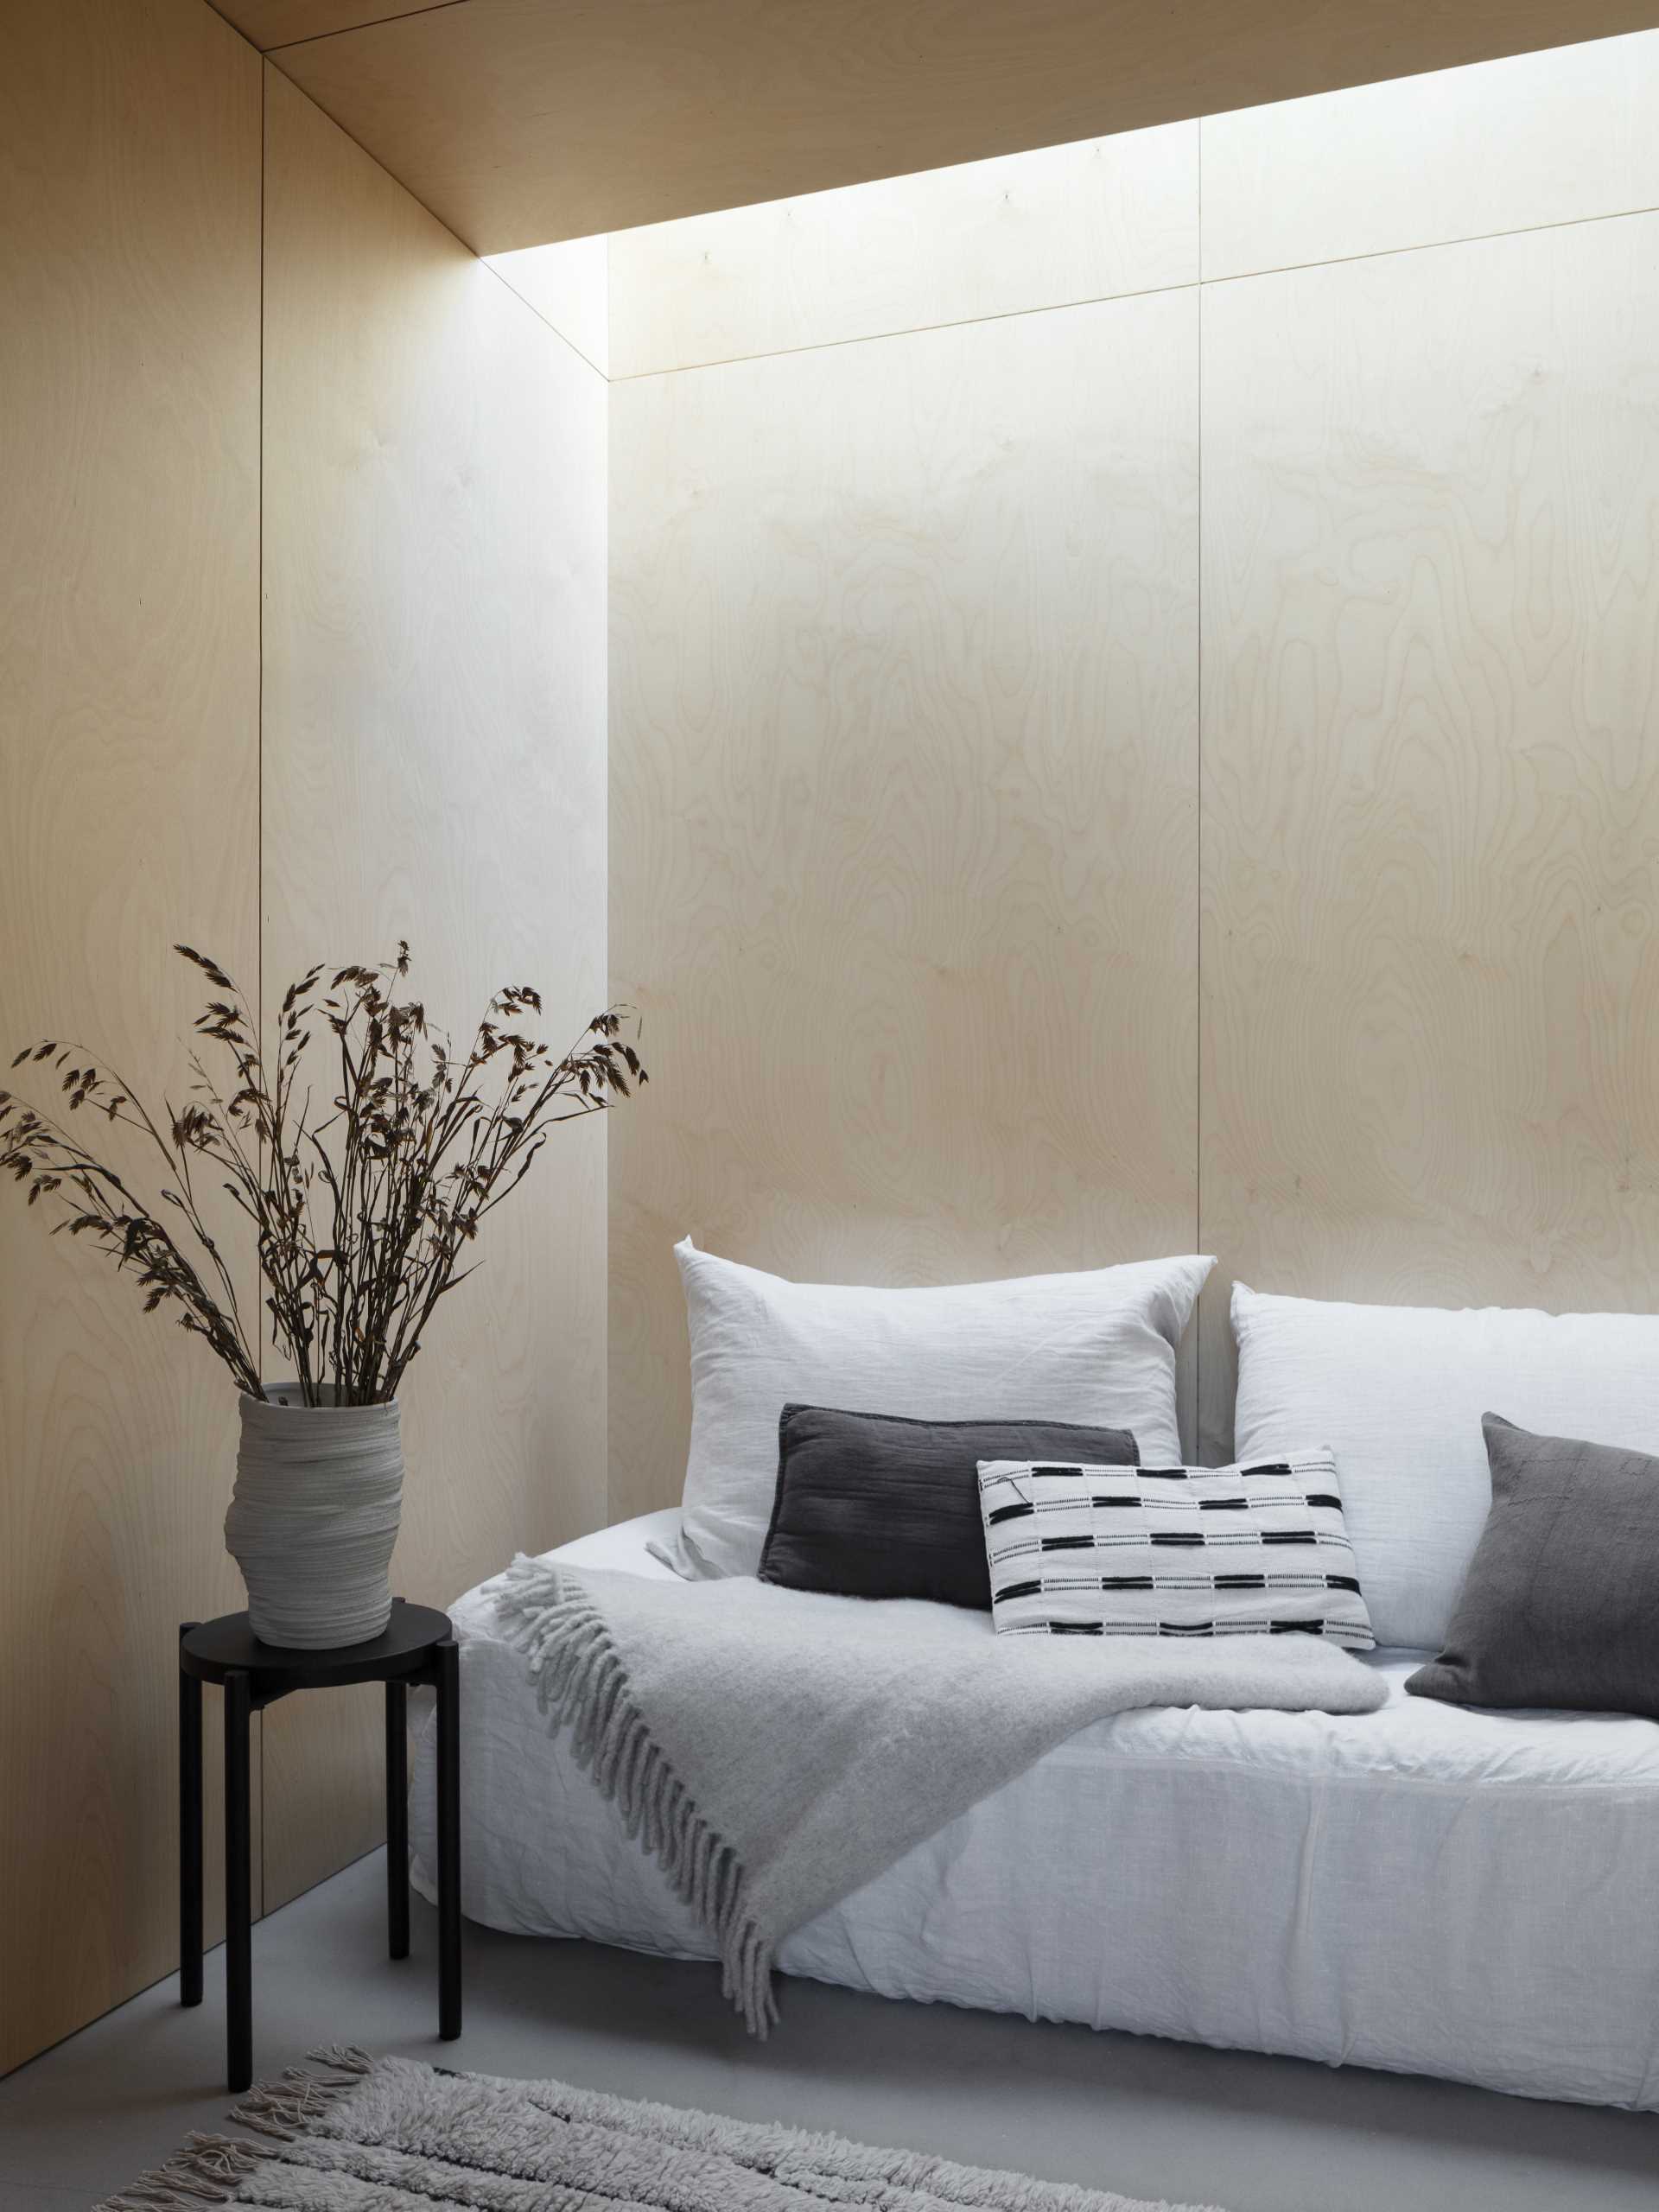 The plywood walls create a natural backdrop for the simple furnishings in the guest suite.  